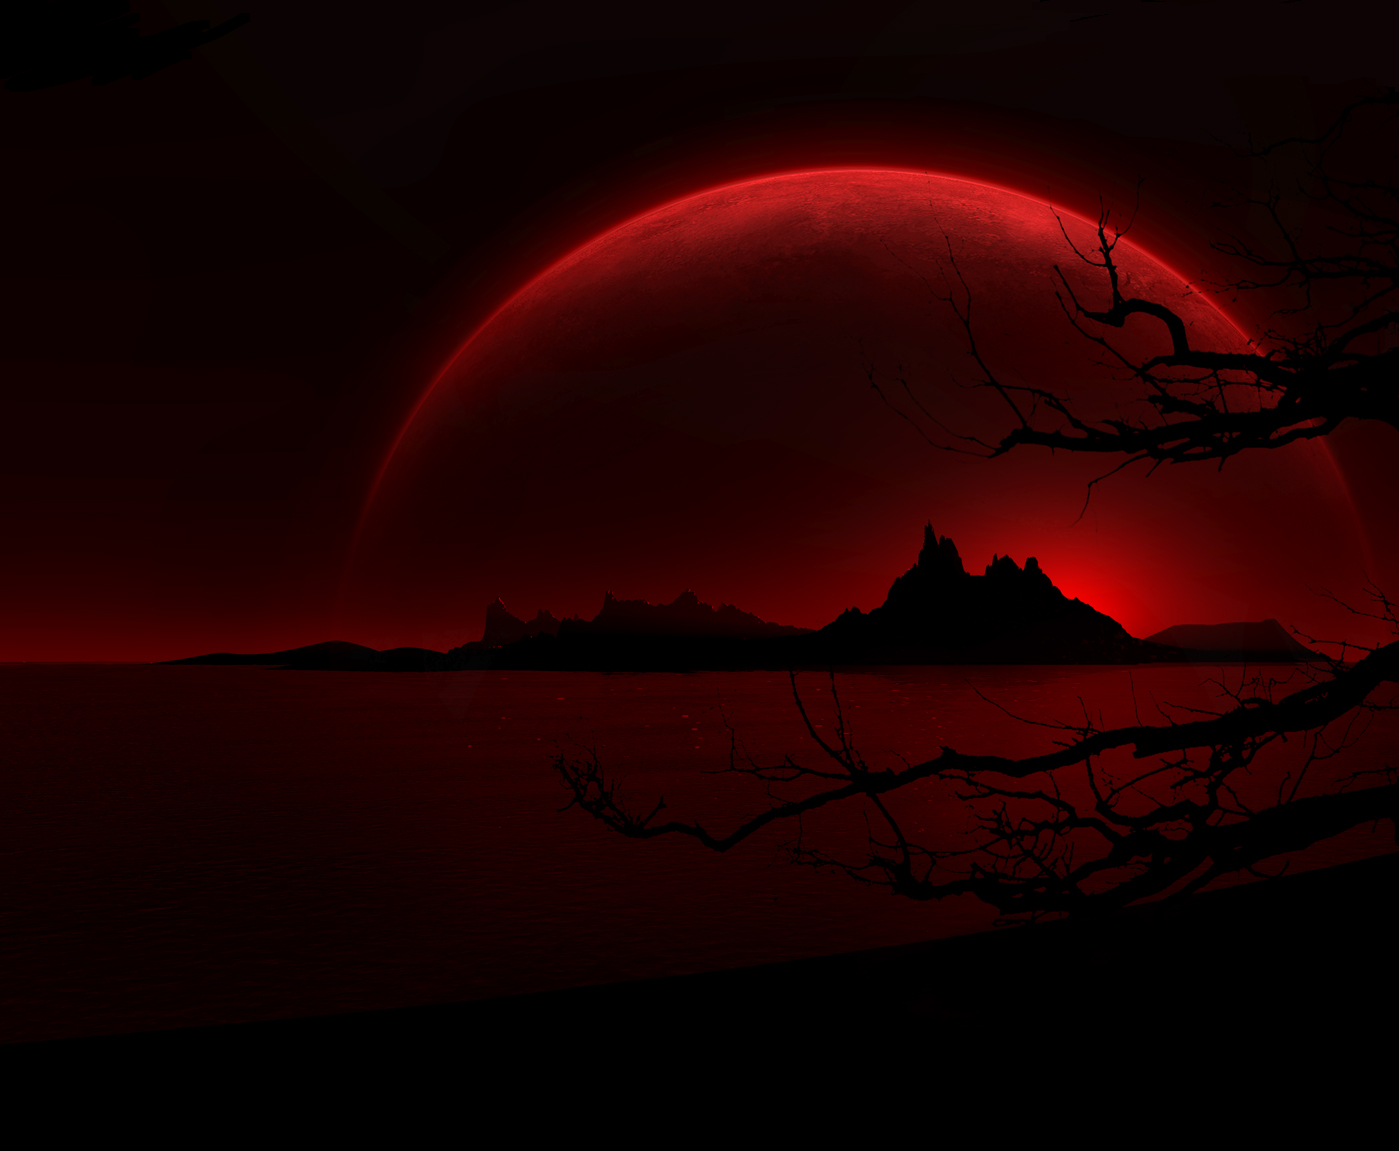 blood moon looking for new the problem is HD Wallpaper of Space